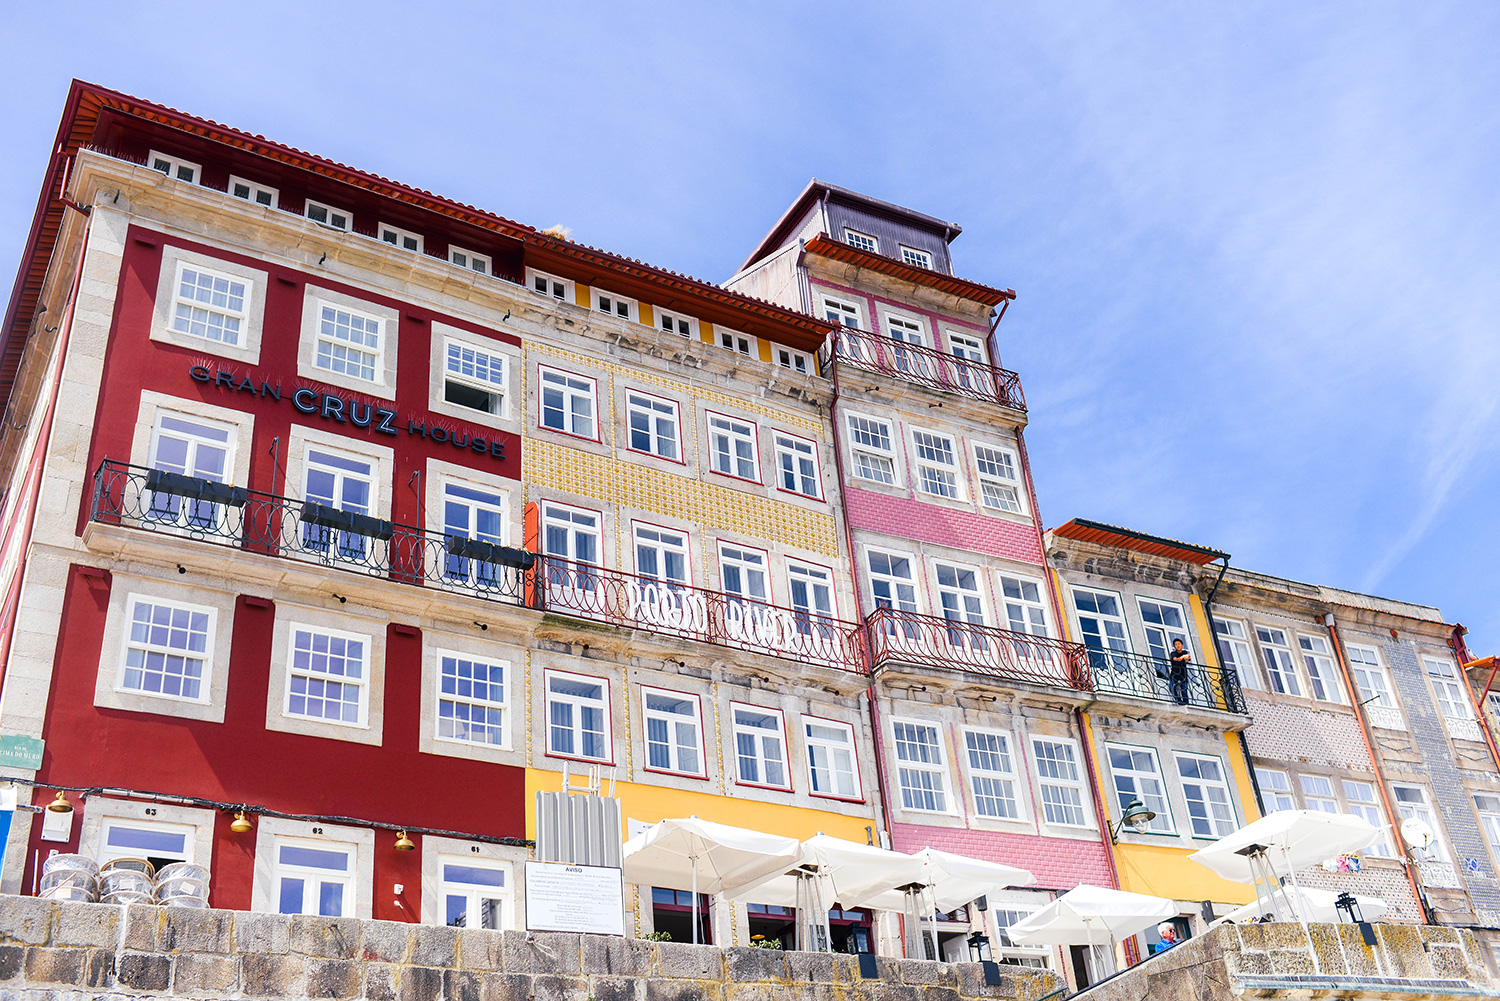 Best Travel Photos of Porto, Portugal | The Style Scribe by Merritt Beck